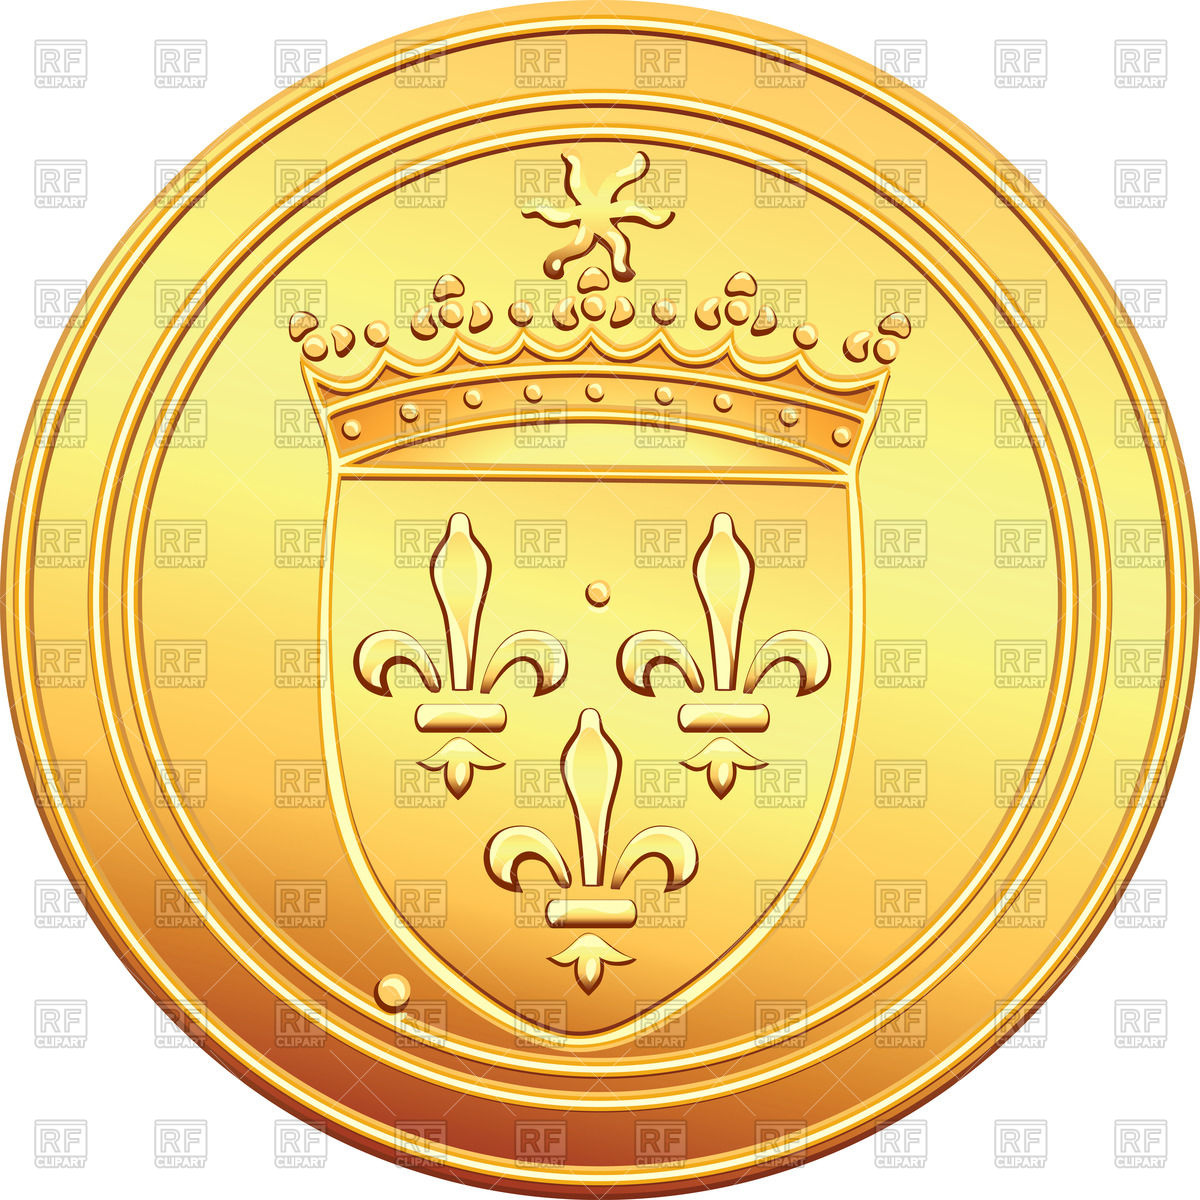 Obverse Old French Coin With The Image Of The Coat Of Arms Download    